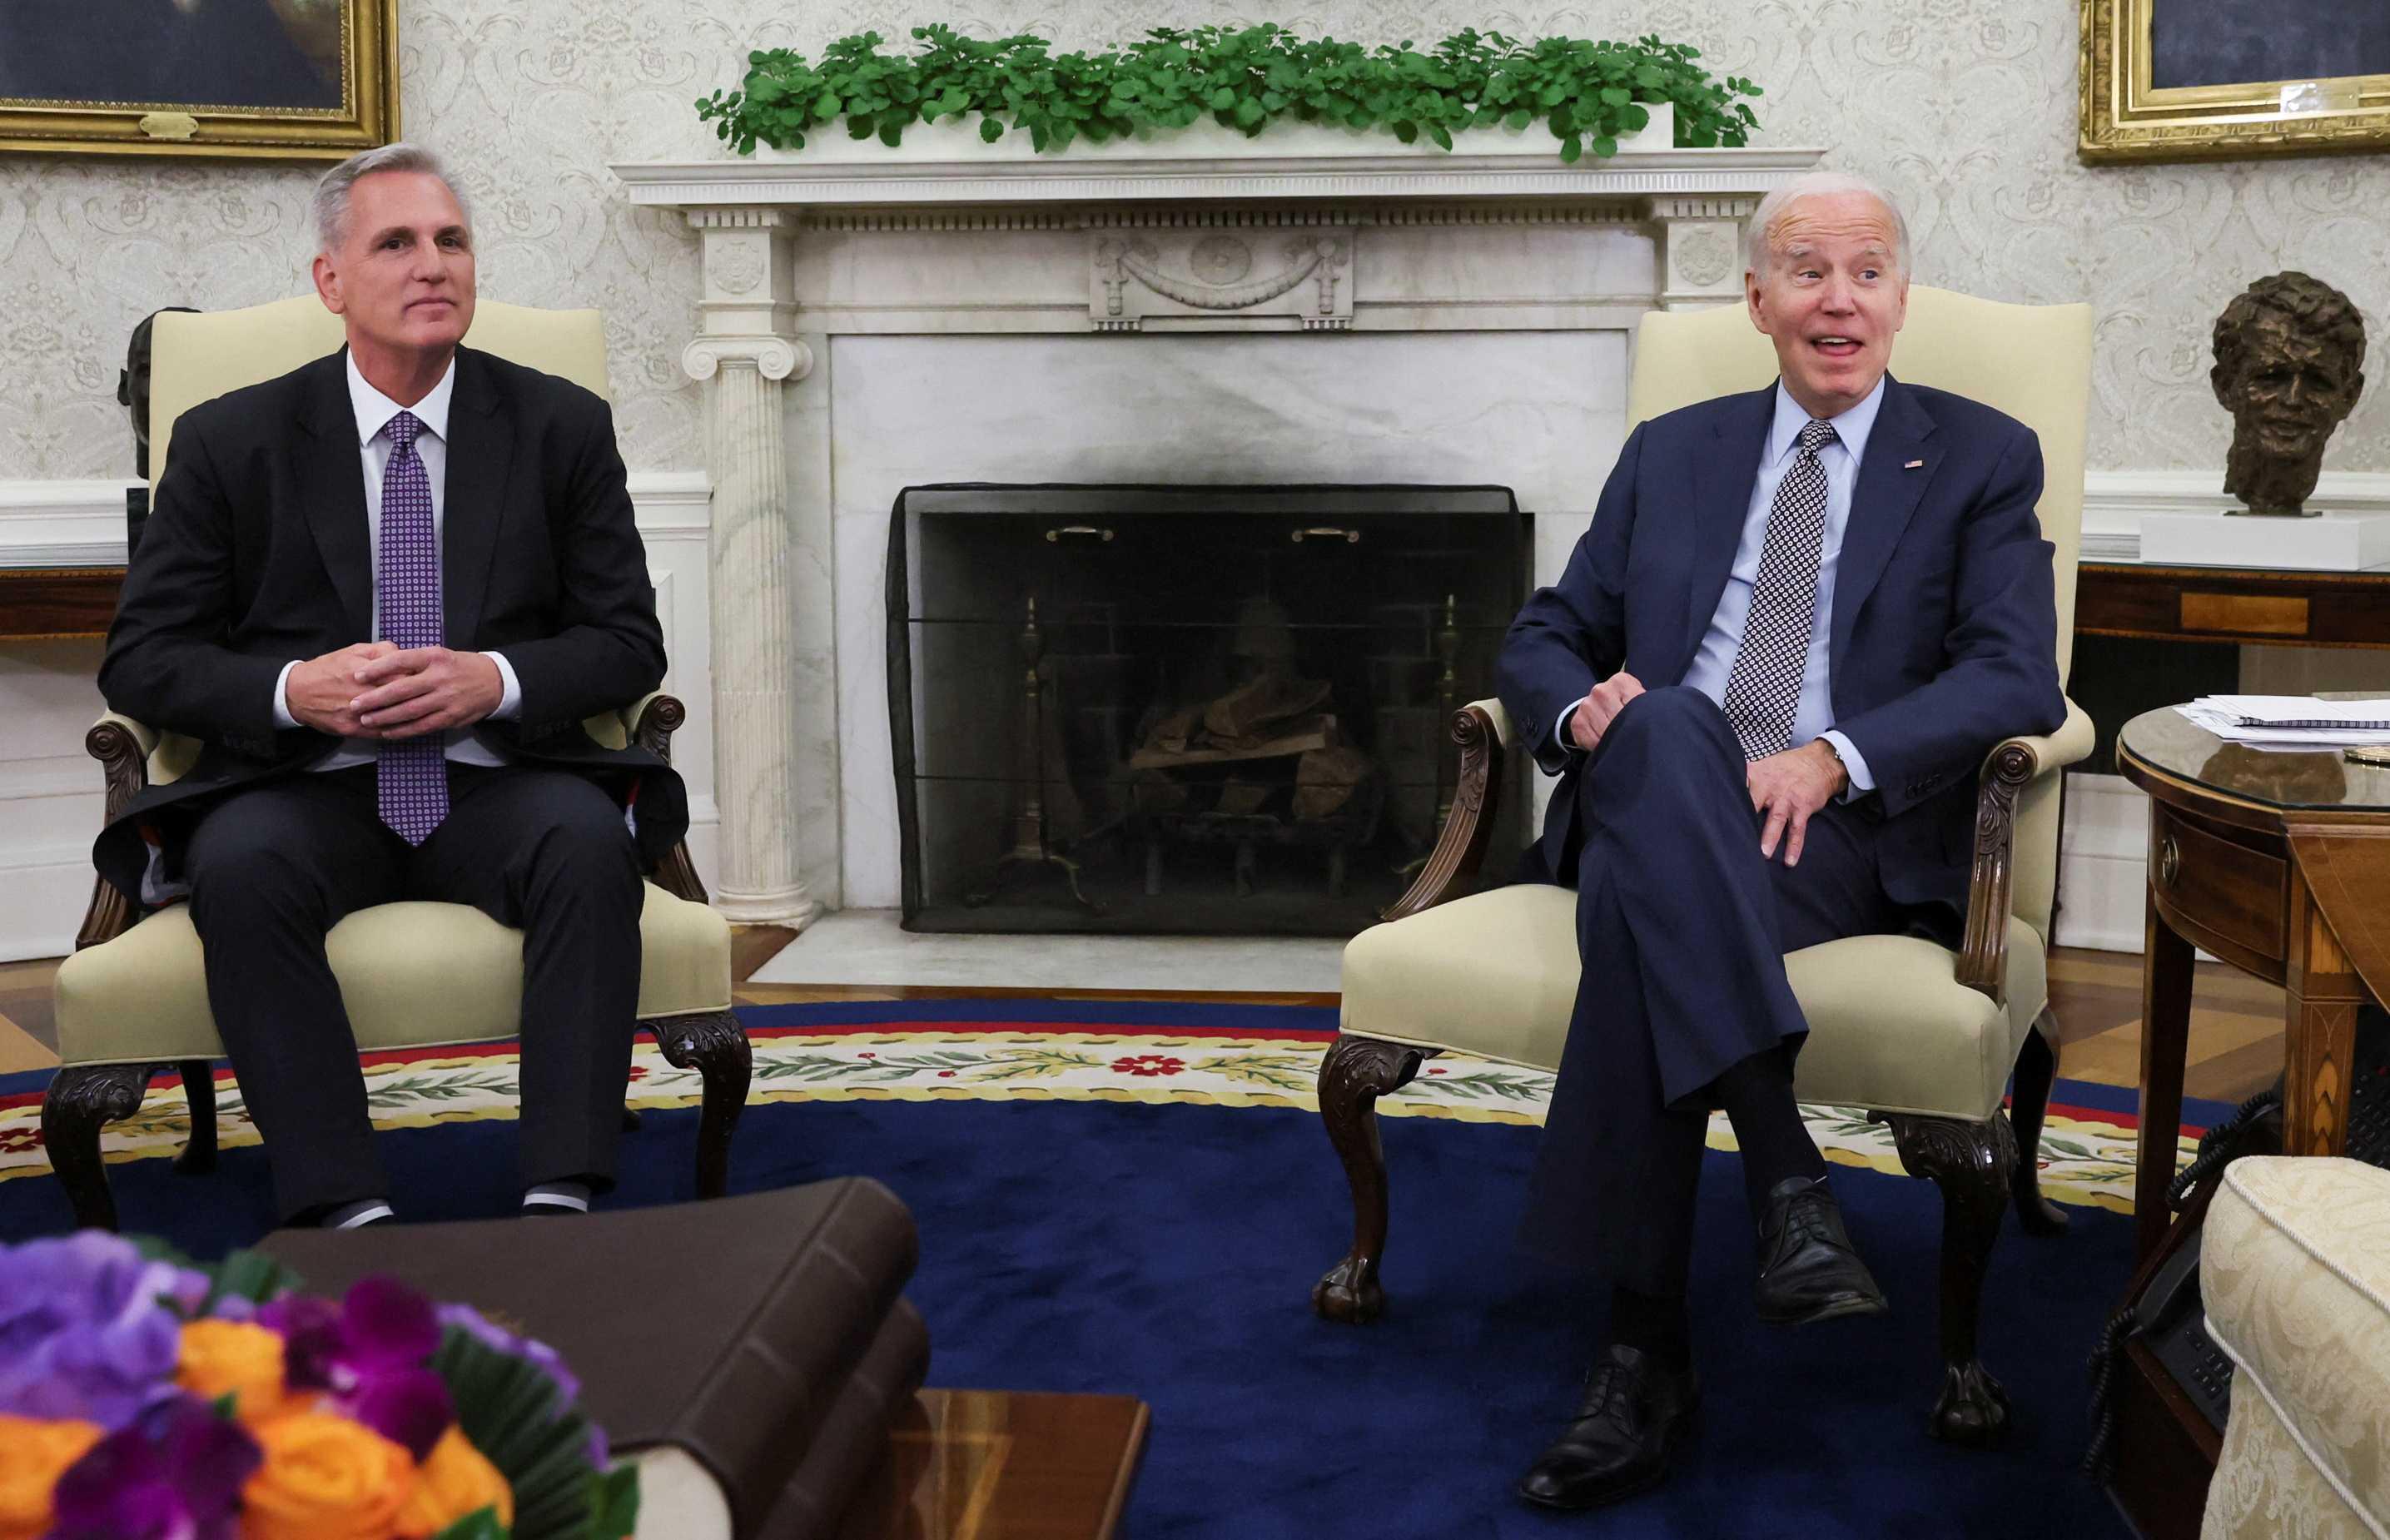 US President Joe Biden hosts debt limit talks with House Speaker Kevin McCarthy in the Oval Office at the White House in Washington, US, May 22. Photo: Reuters